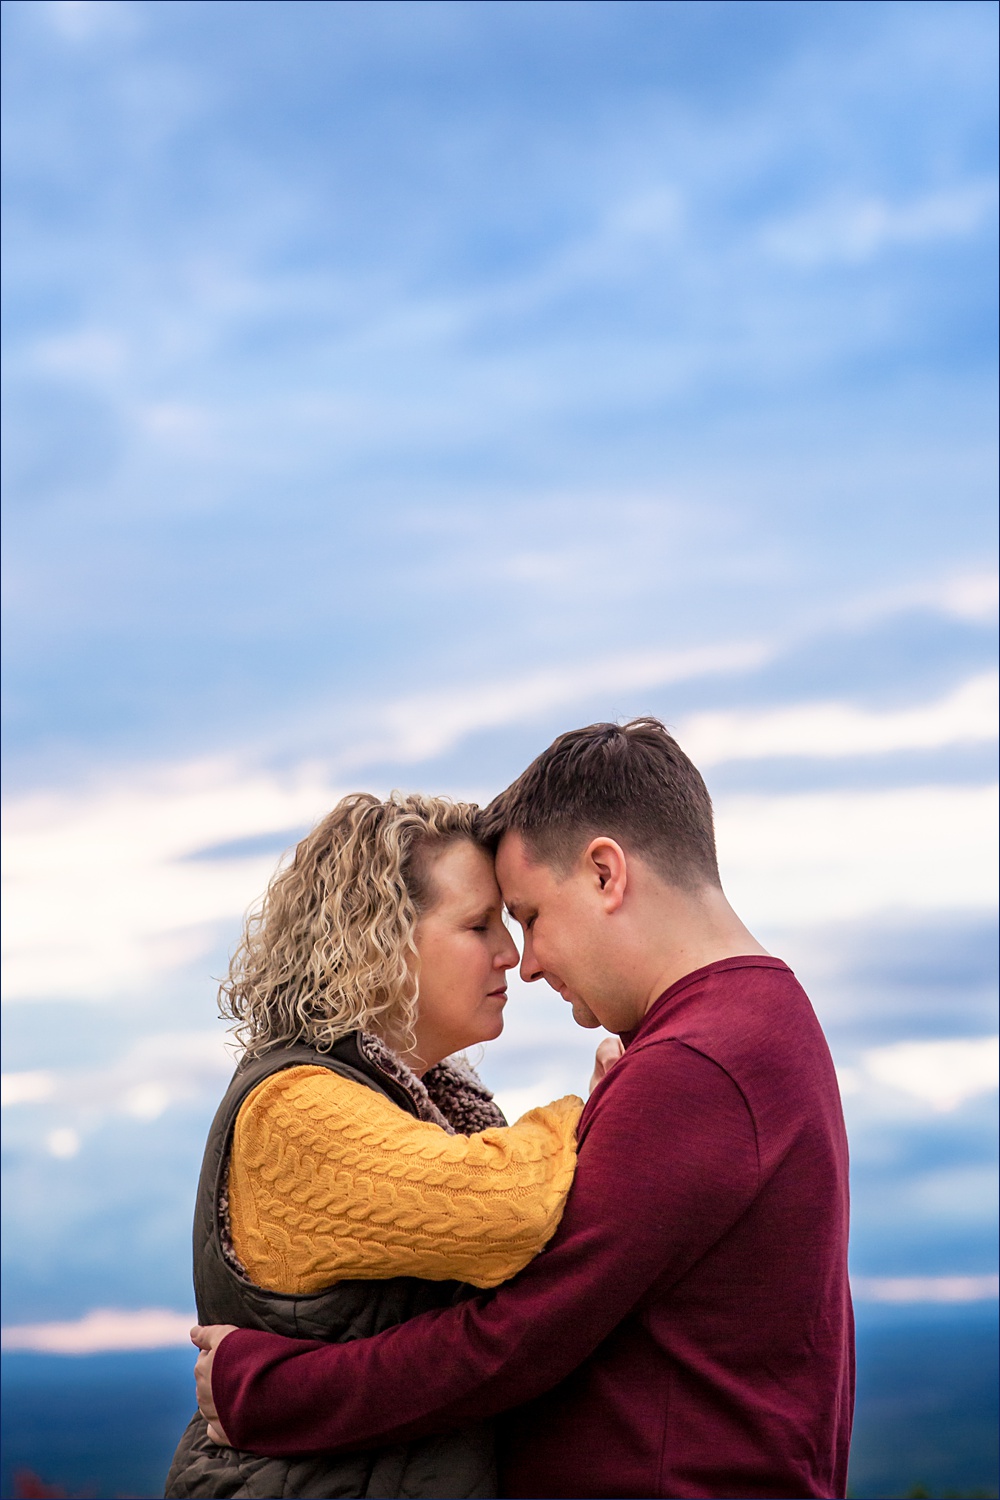 The couple and the stormy sky at their Mount Agamenticus in York Maine engagement session